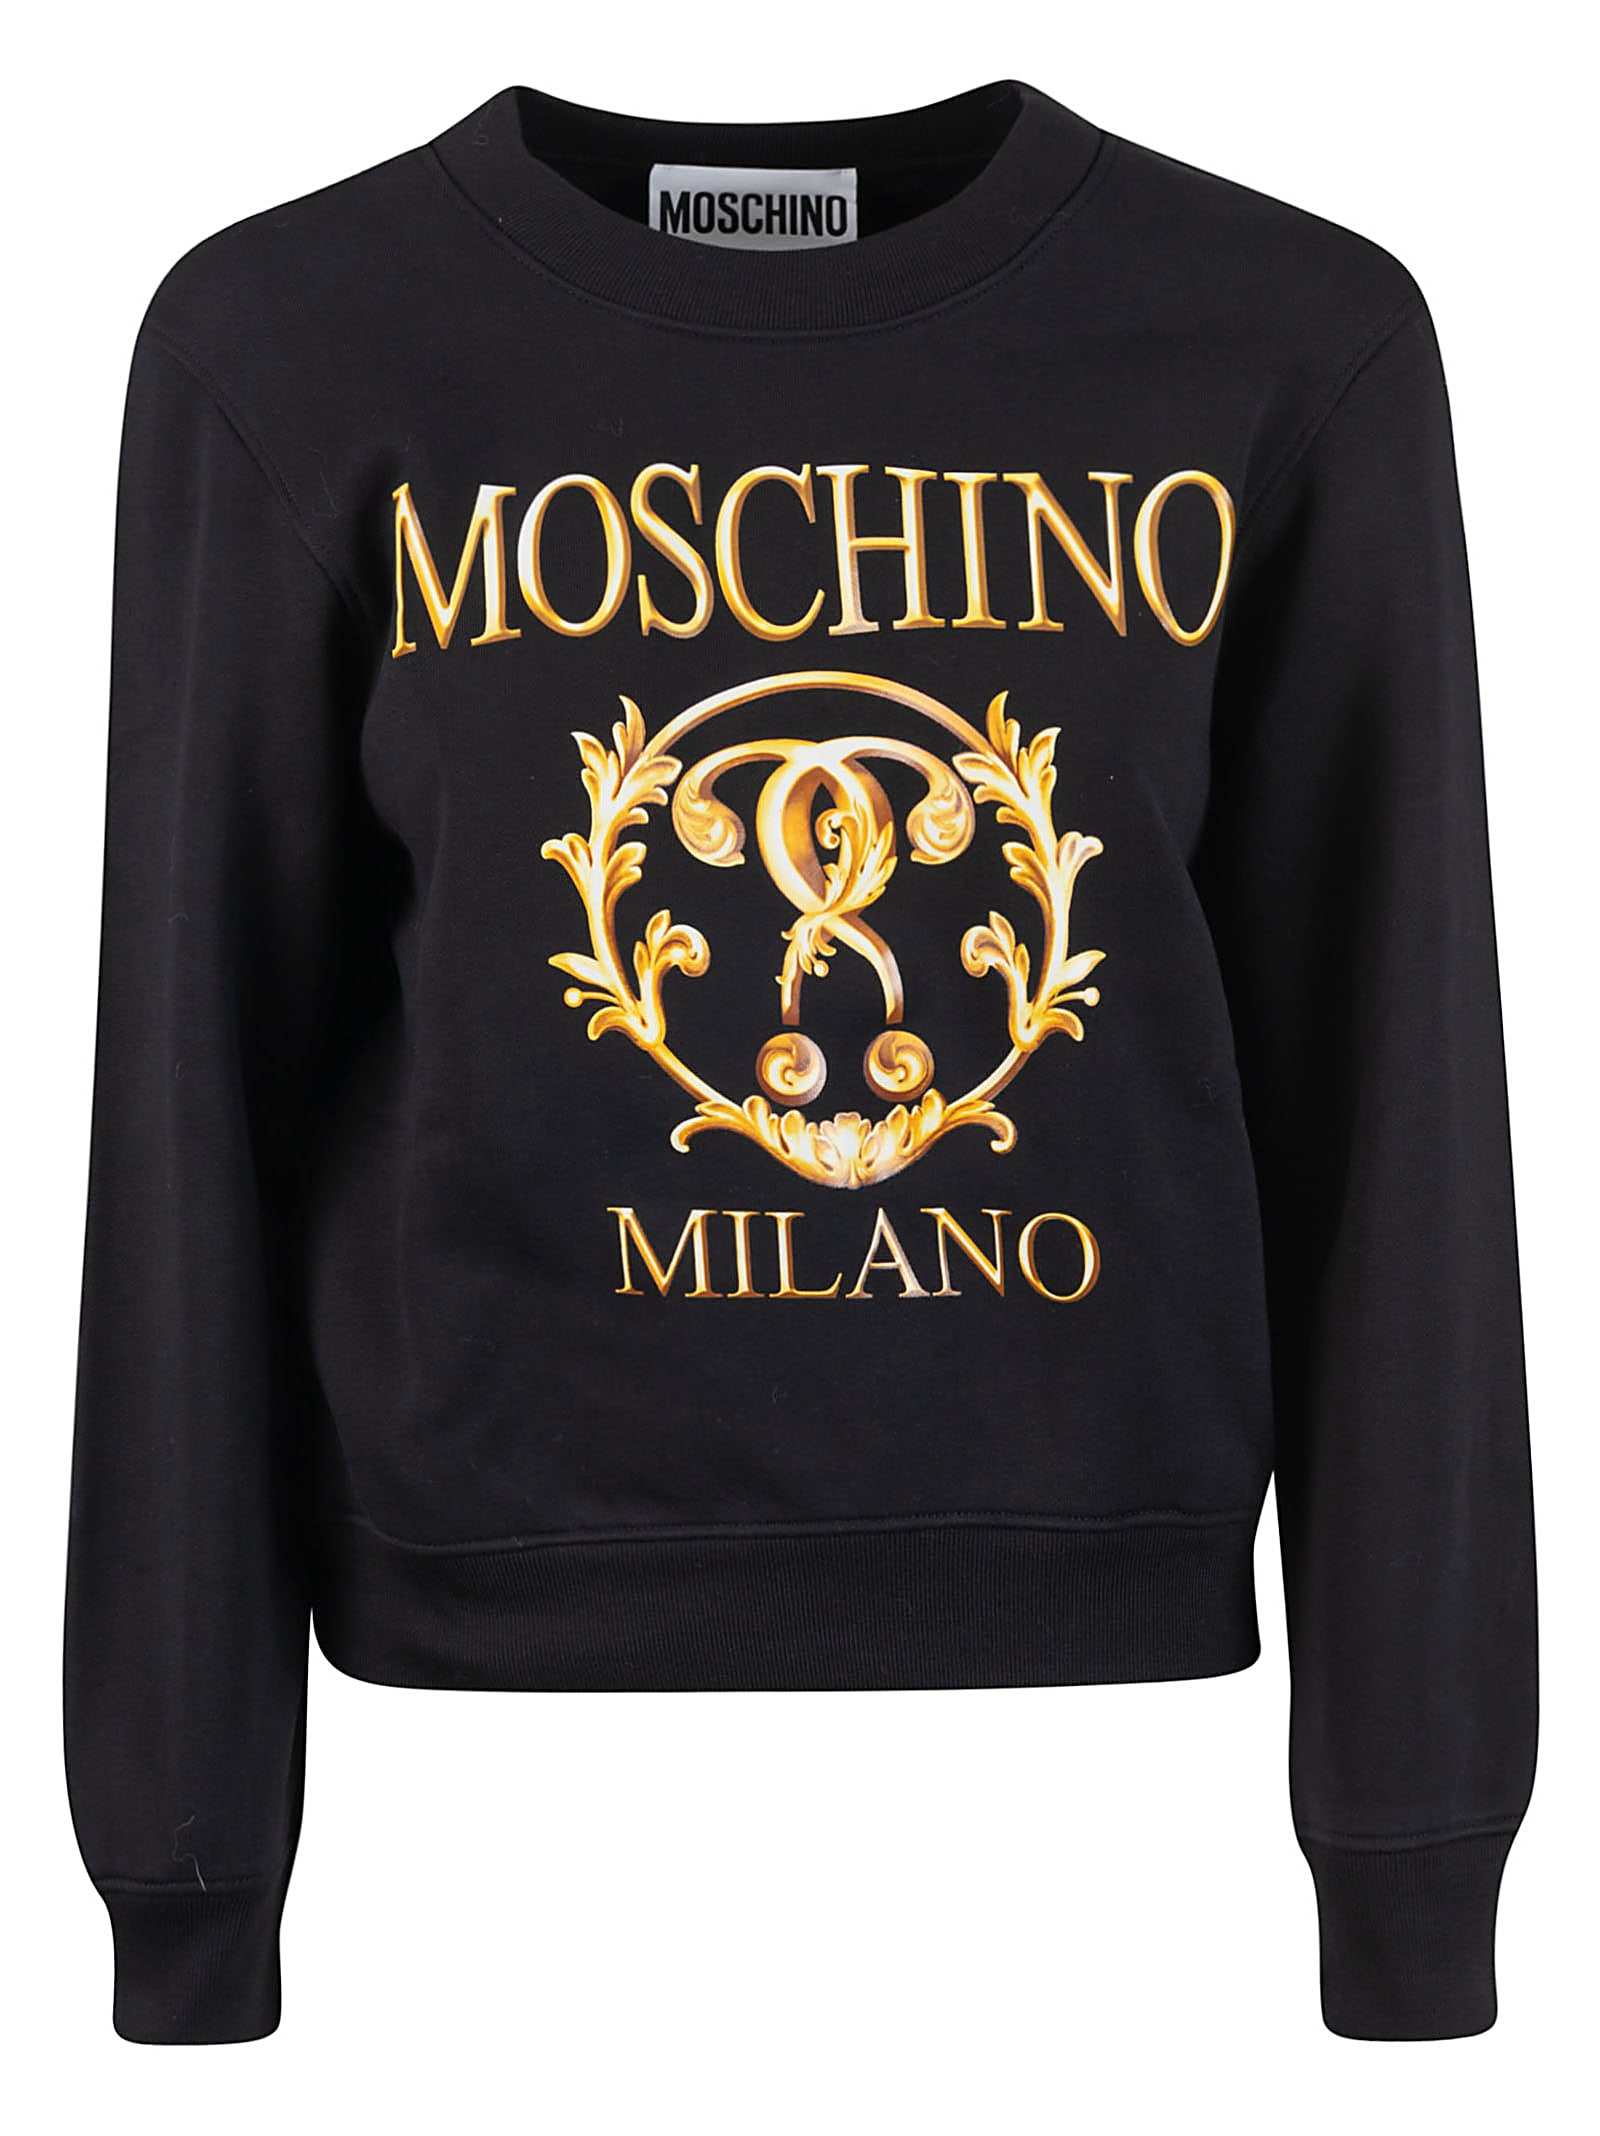 milano moschino off 71% - online-sms.in